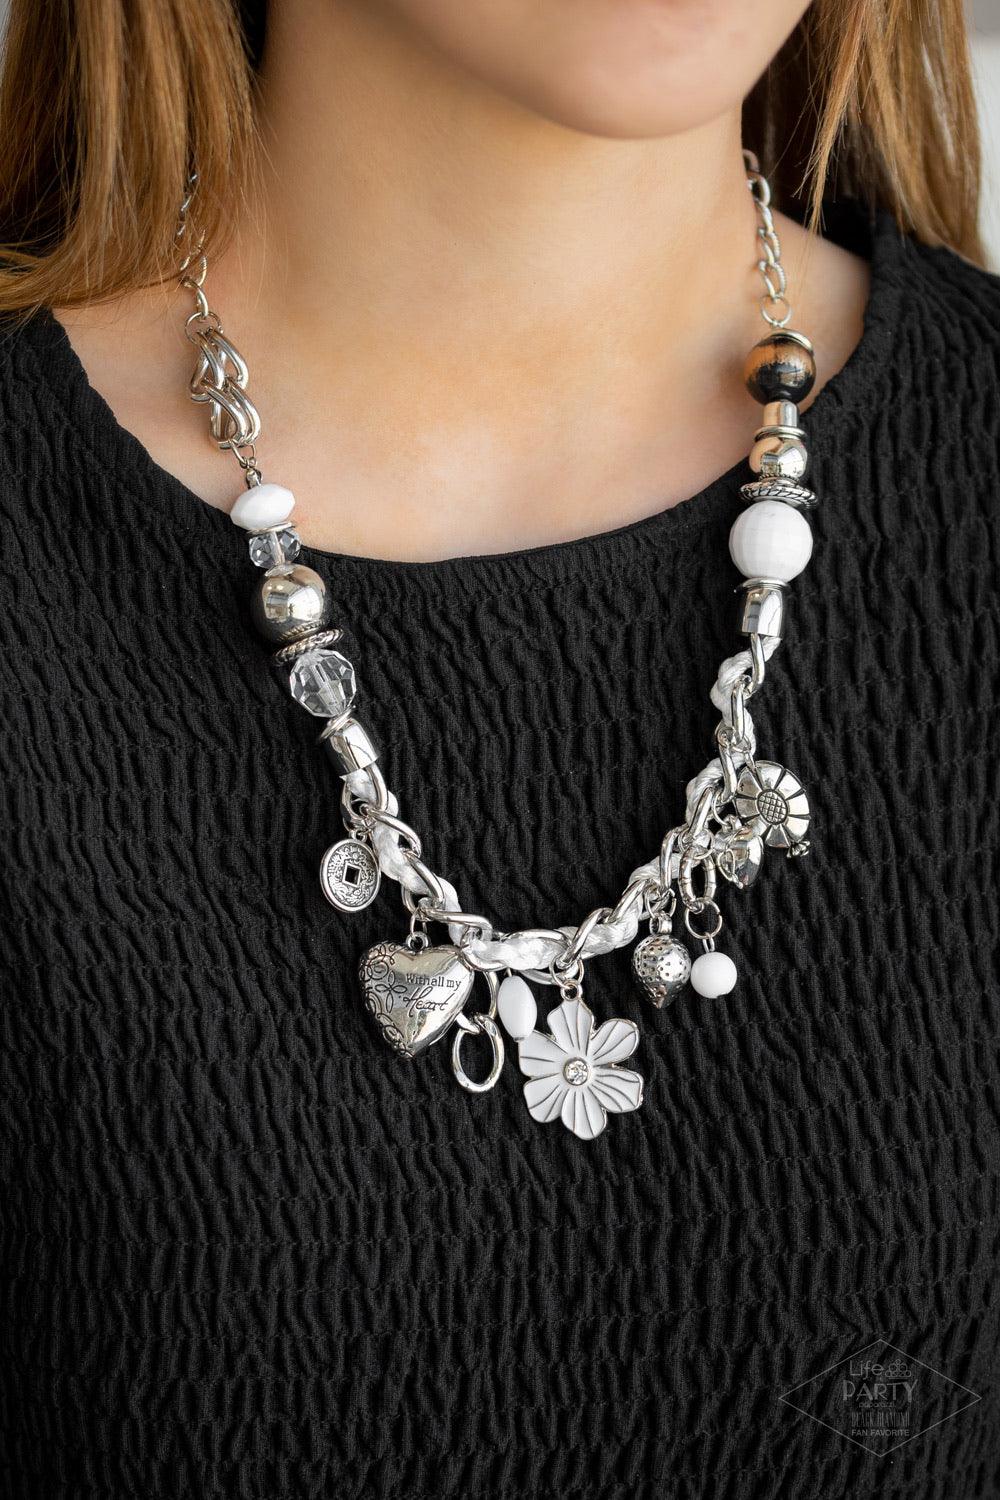 Paparazzi Accessories Charmed, I Am Sure - White White and ivory cording is braided through a chunky silver chain. A unique variety of charms decorate the piece including a delicate flower and a heart inscribed with the phrase "With All My Heart" on one s